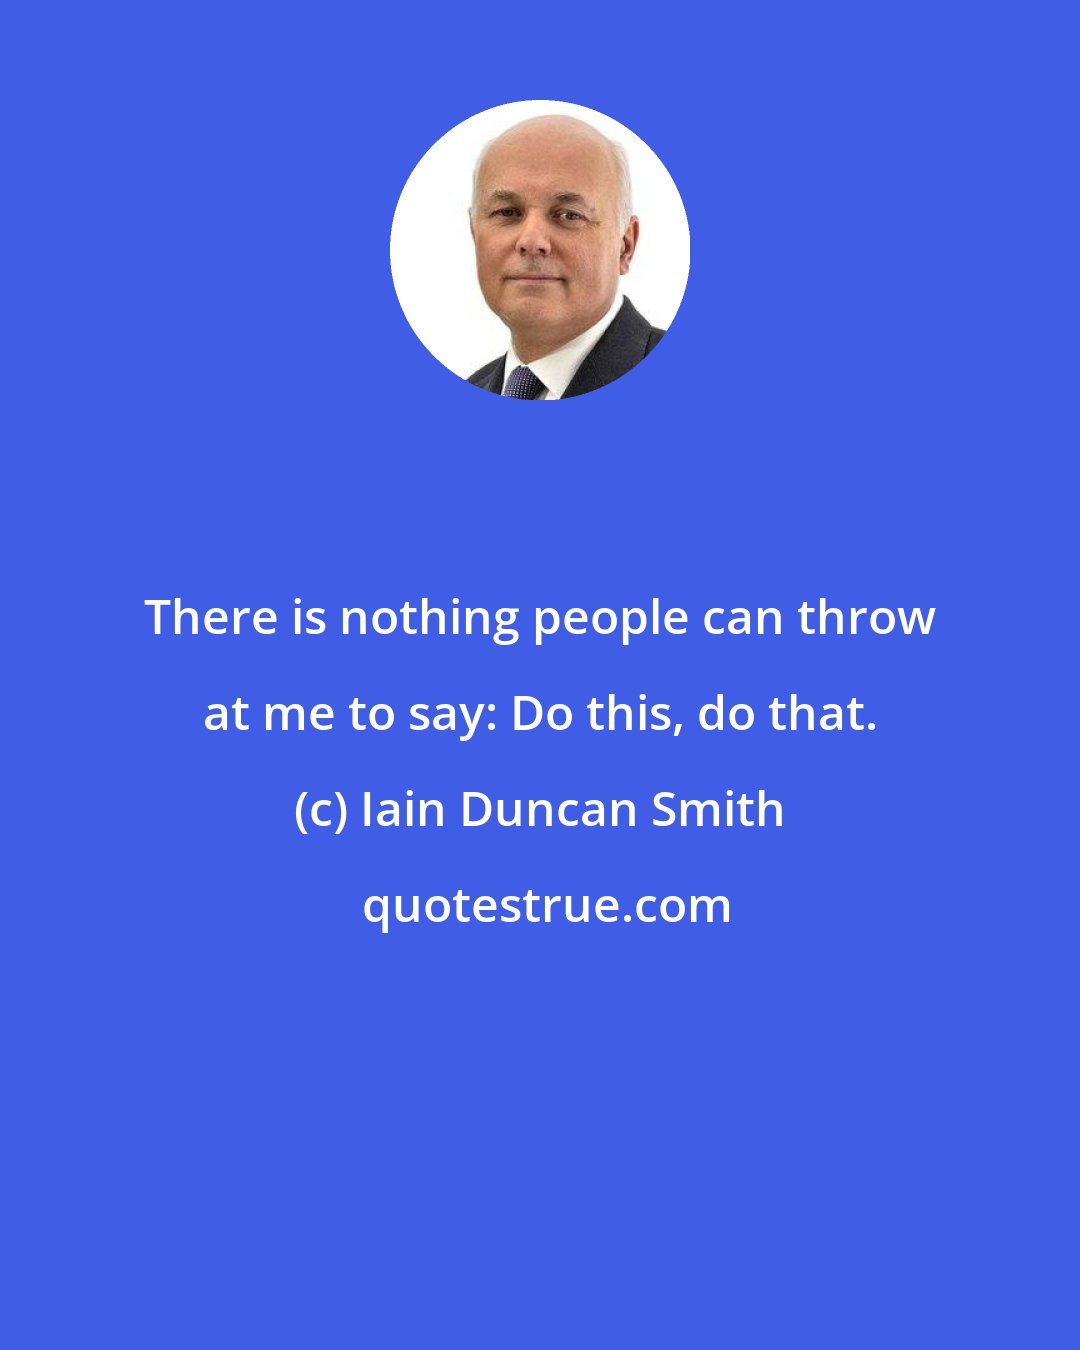 Iain Duncan Smith: There is nothing people can throw at me to say: Do this, do that.